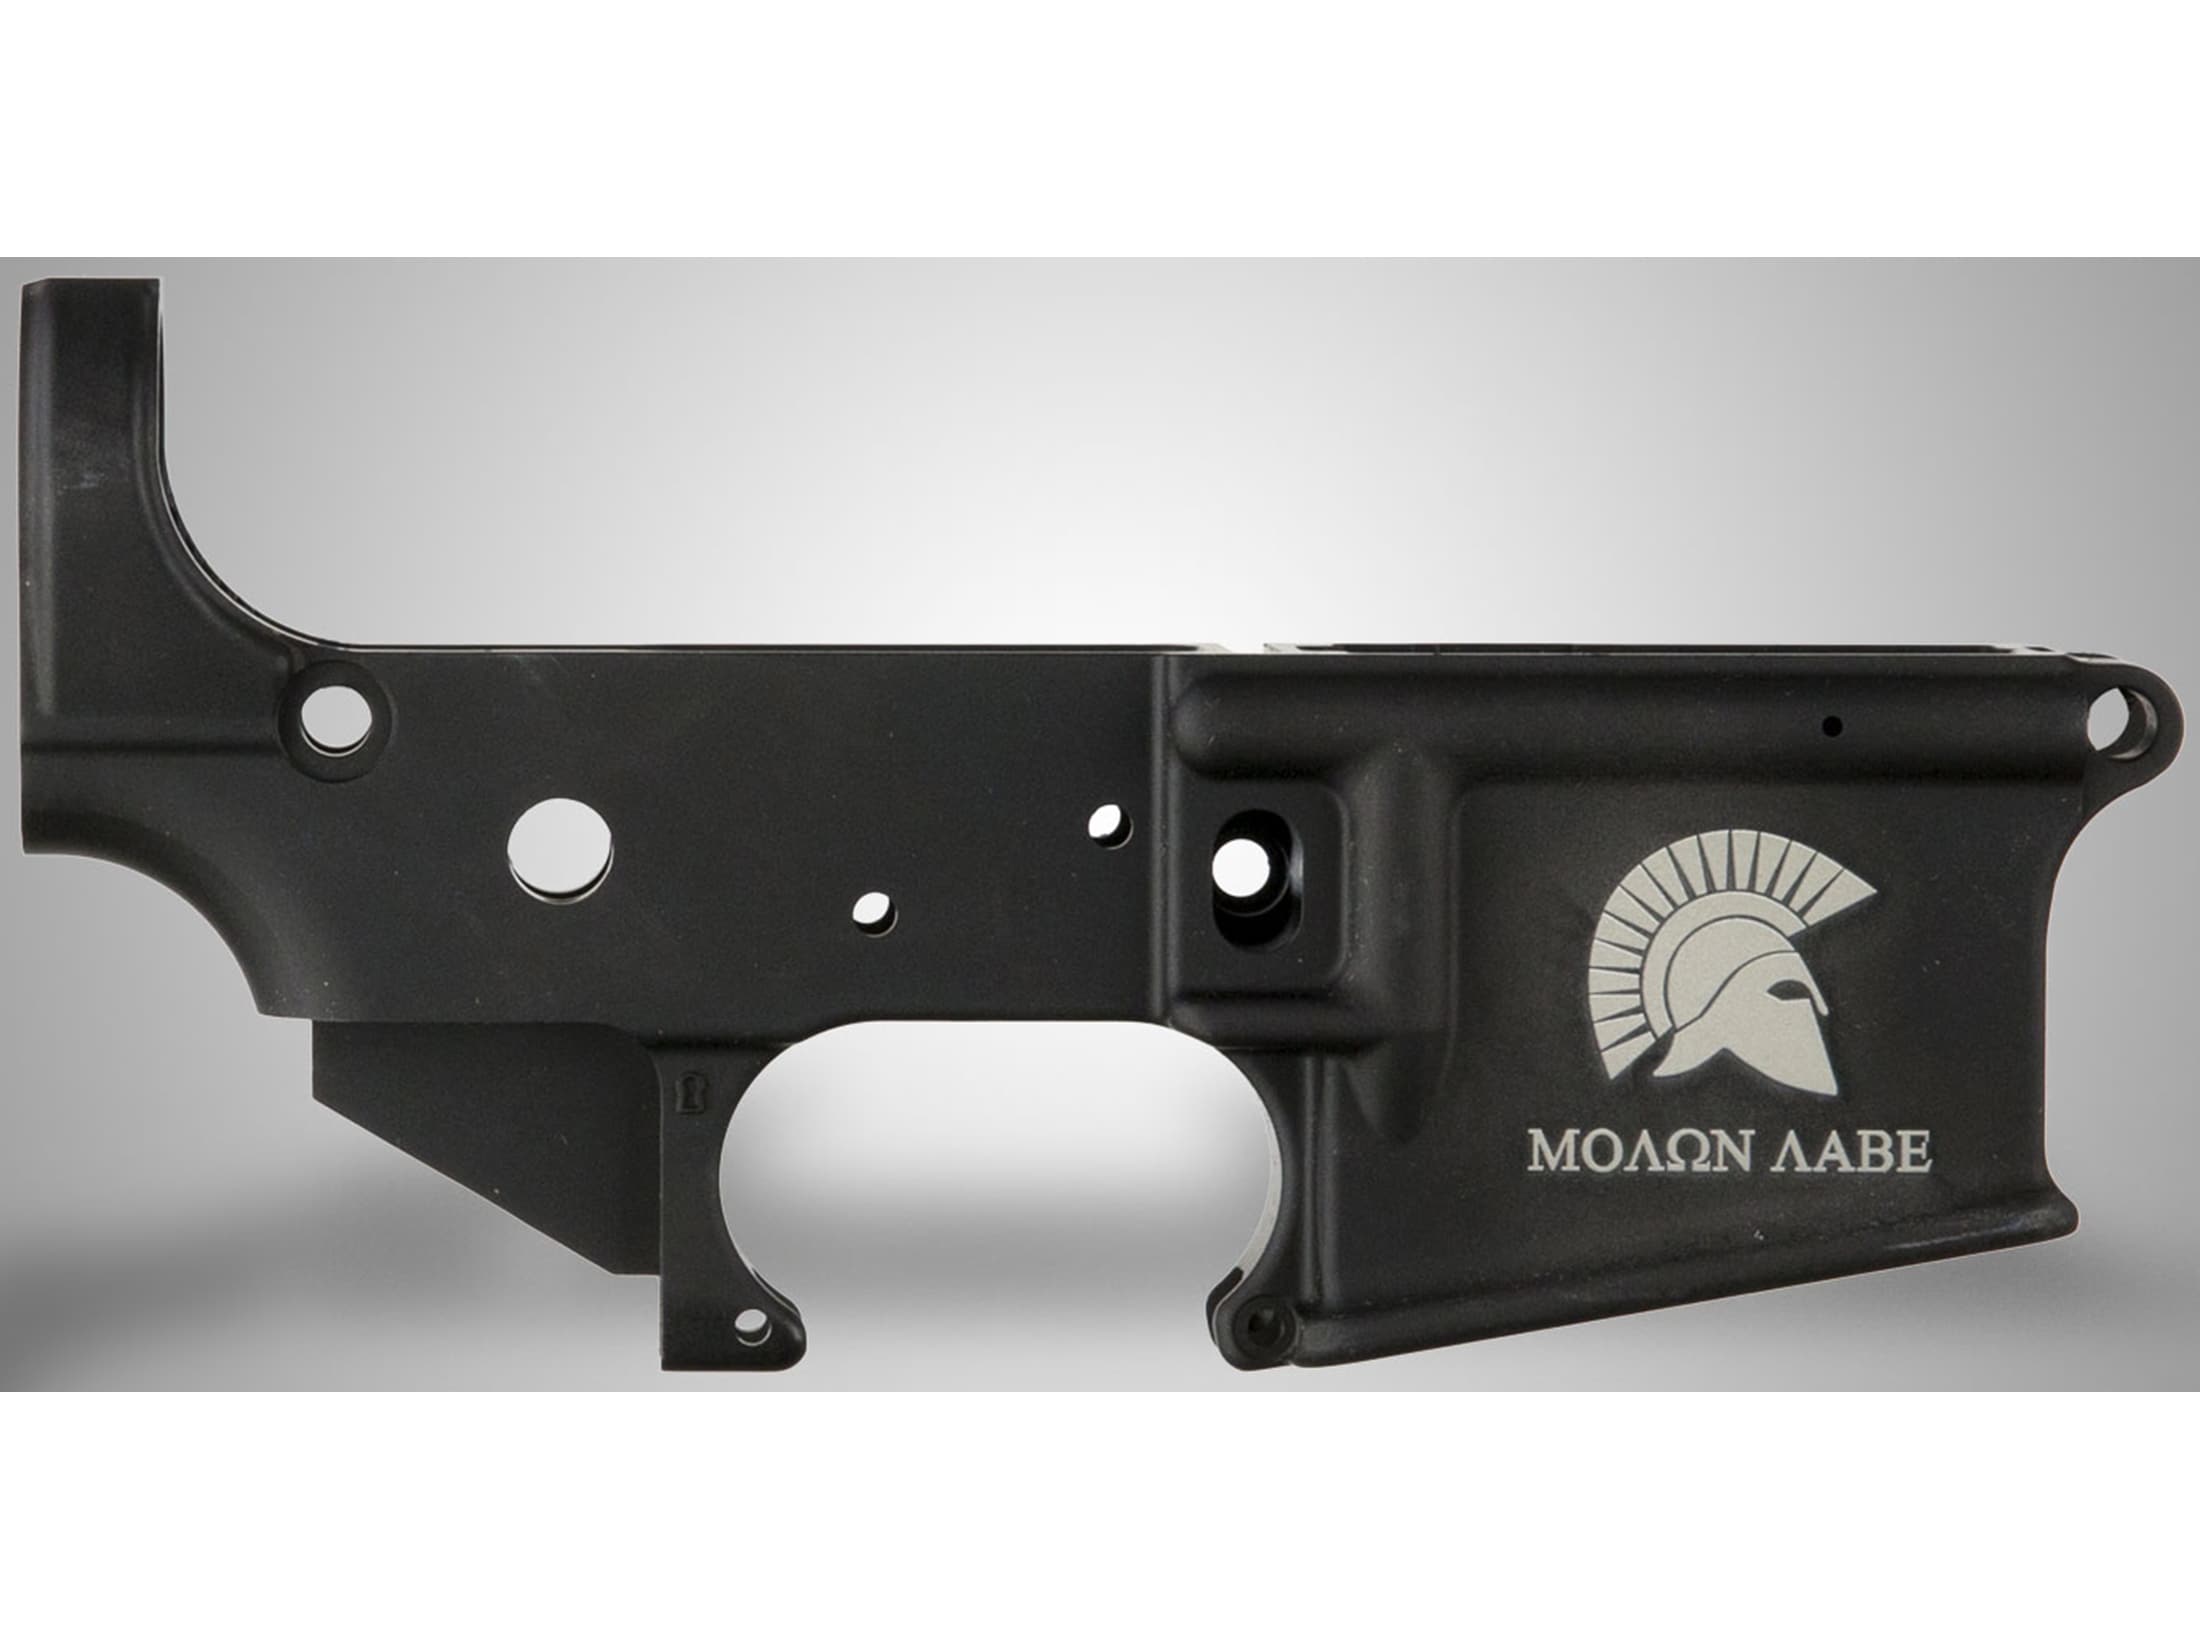 Image of Anderson AM-15 AR-15 Stripped Lower Receiver Molon Labe Aluminum Black